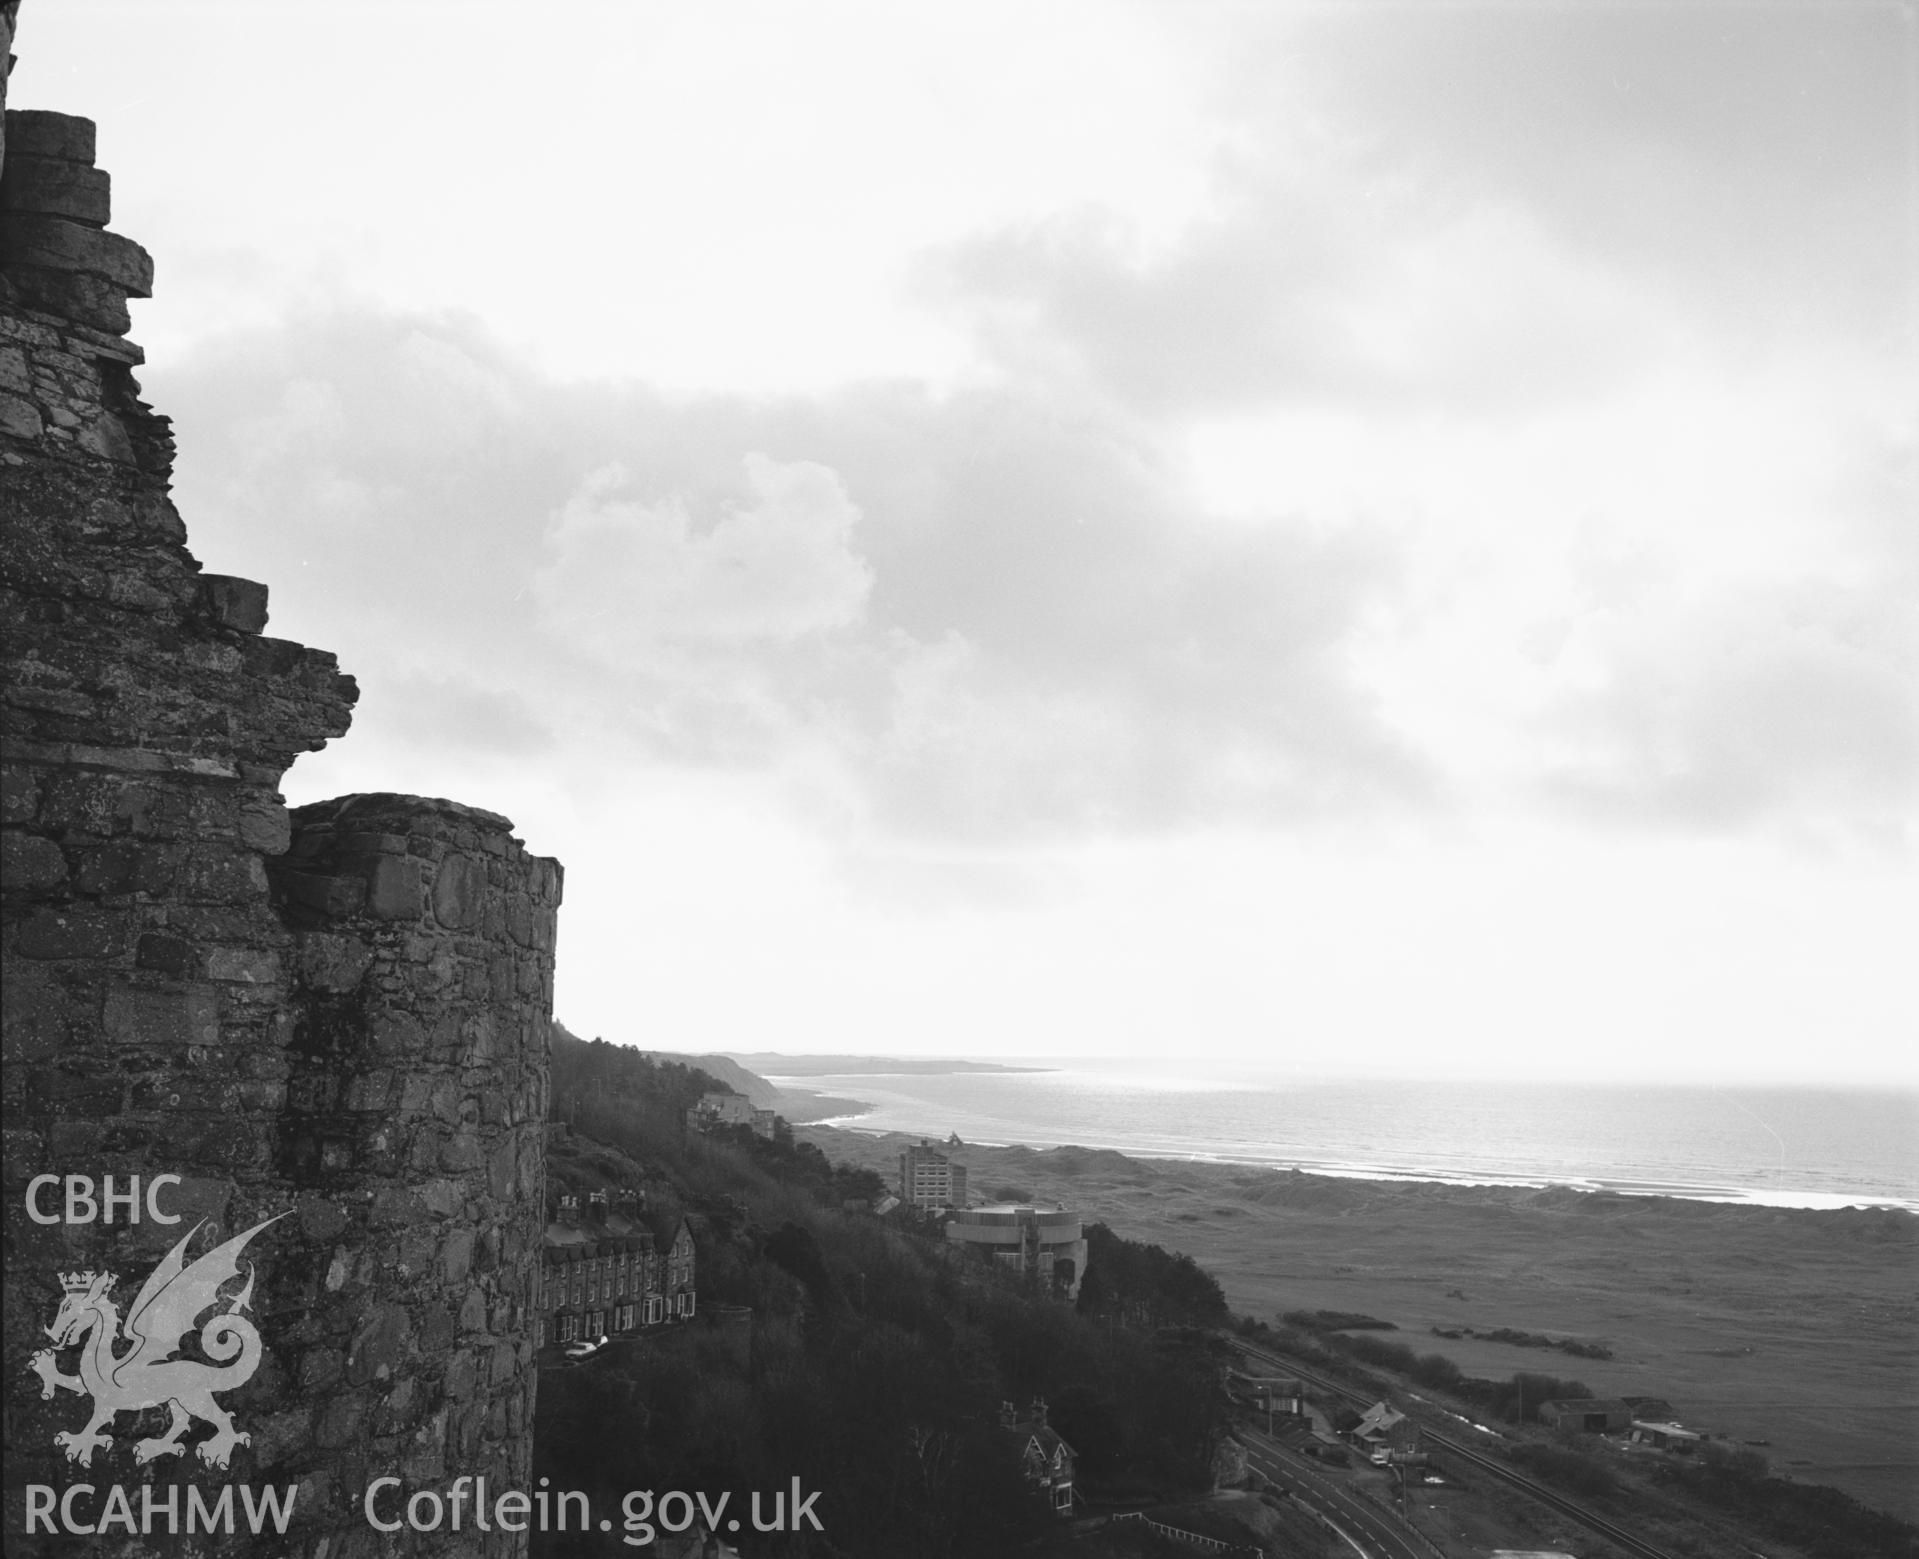 Photographic negative showing view of Harlech Castle; collated by the former Central Office of Information.